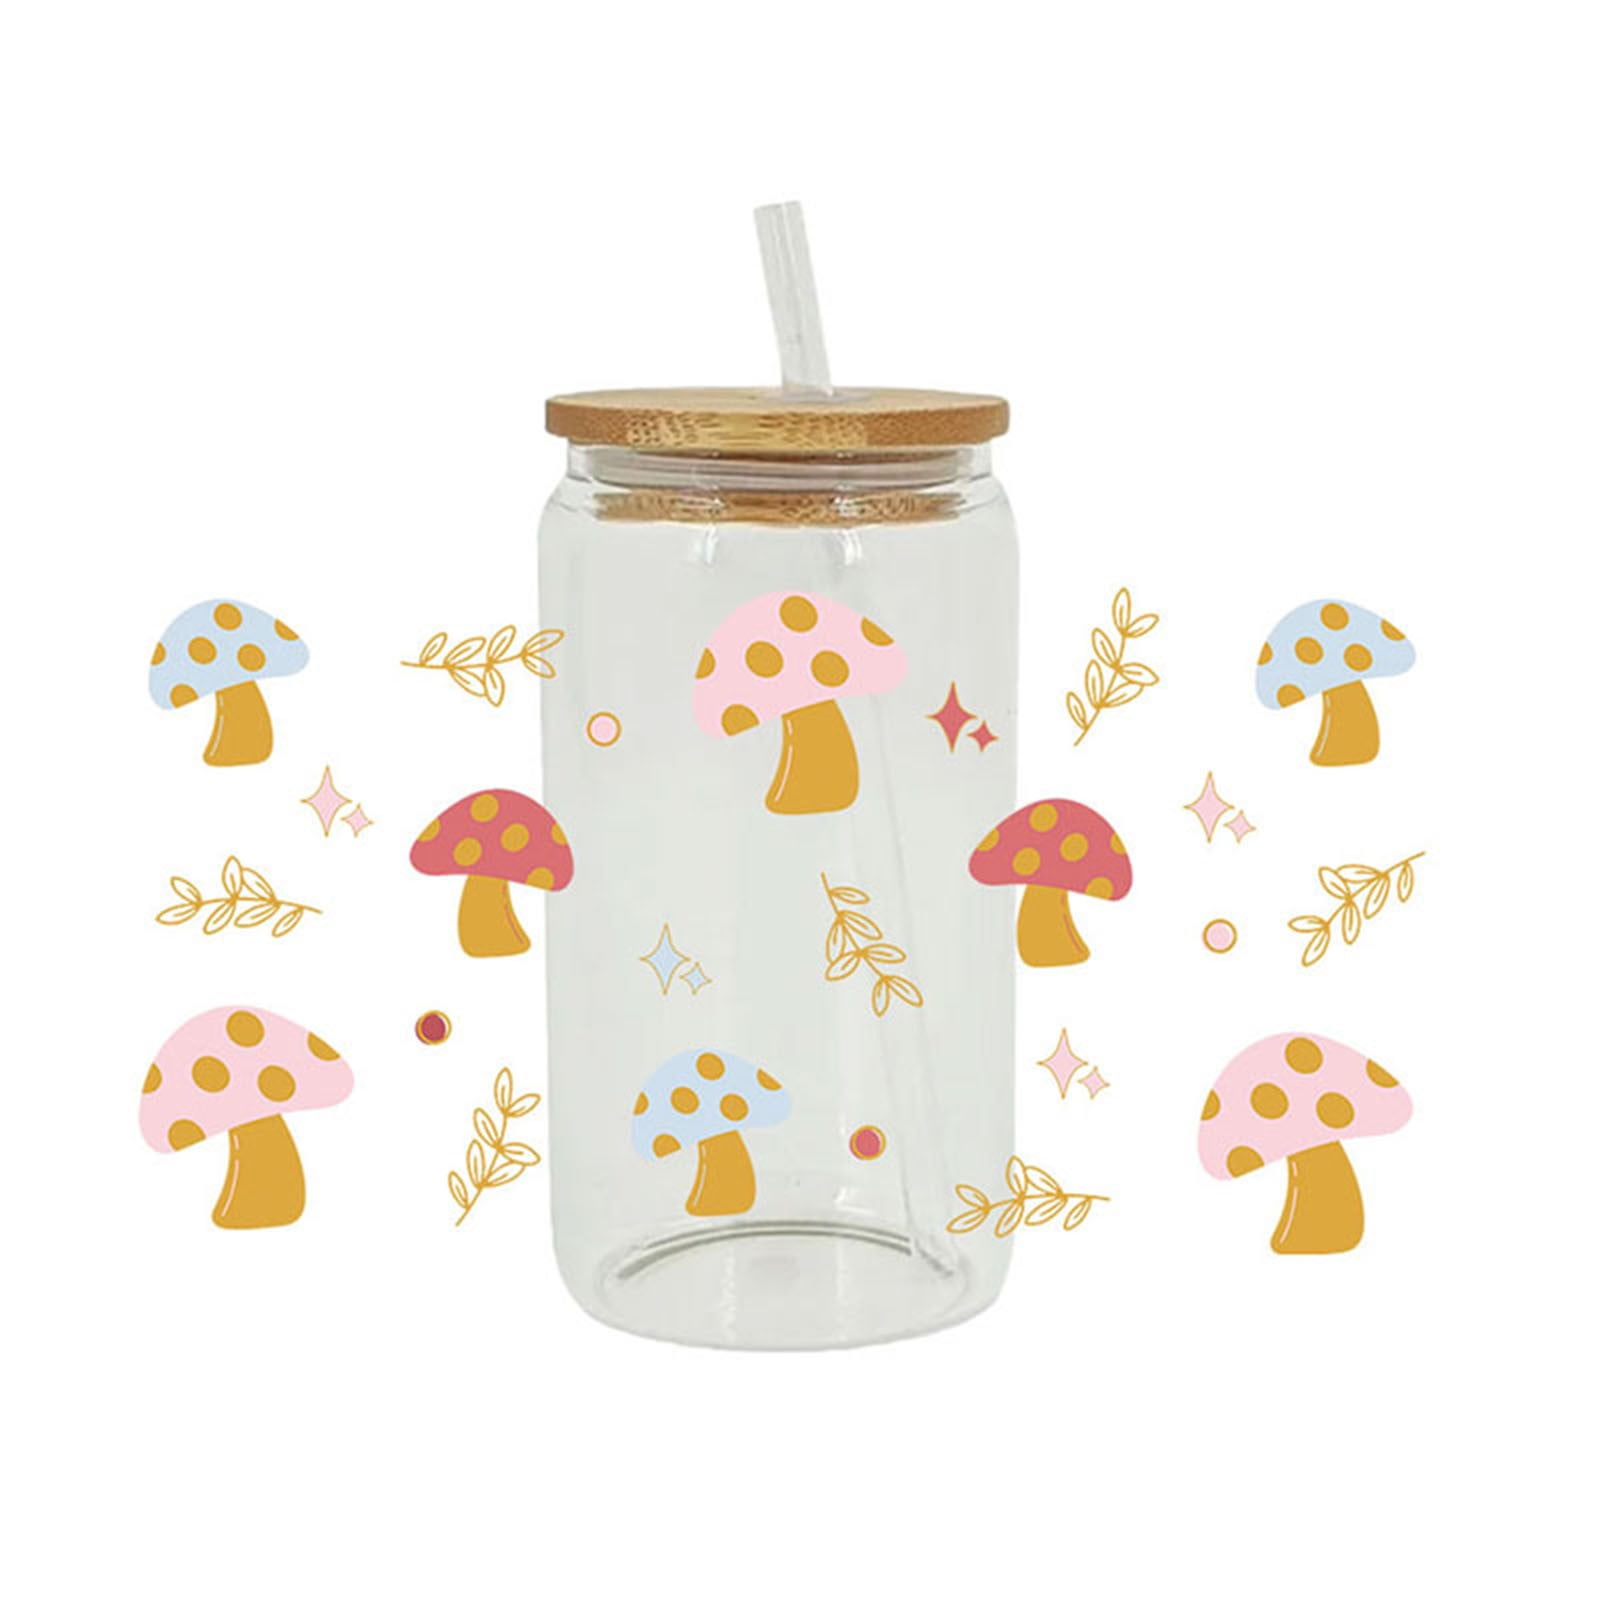 COFEST Stickers,Cup Wrap Transfer Stickers,Fall Leaves Decorative Sticker  For Cups,Mugs,Tumbler,Bottles,Dishes Ect,I, 